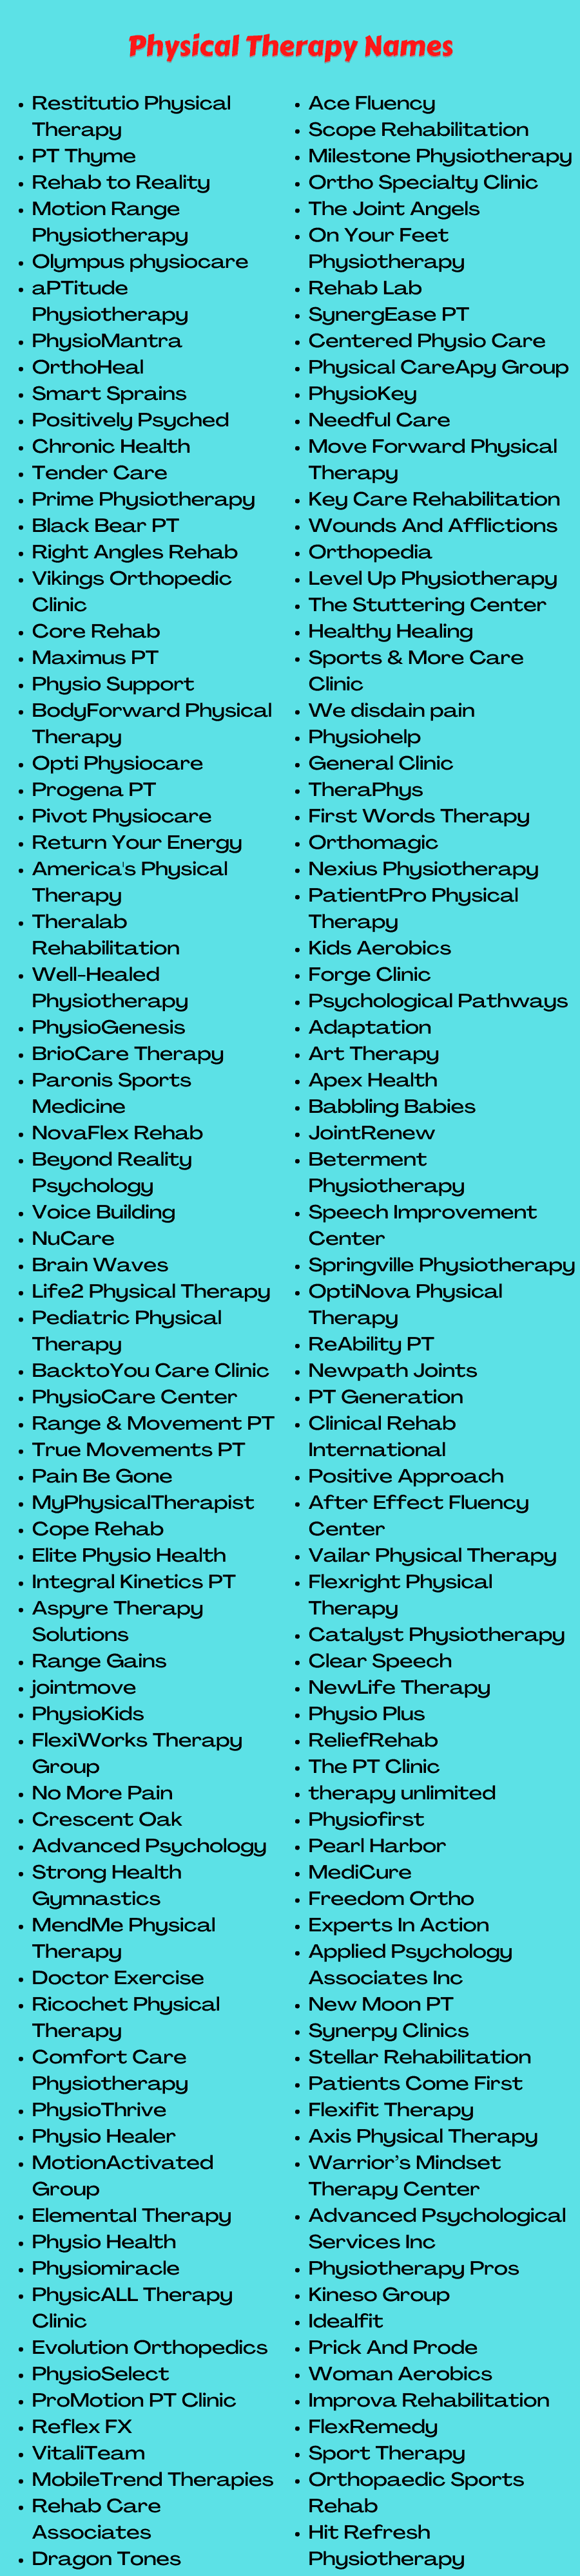 Physical Therapy Names